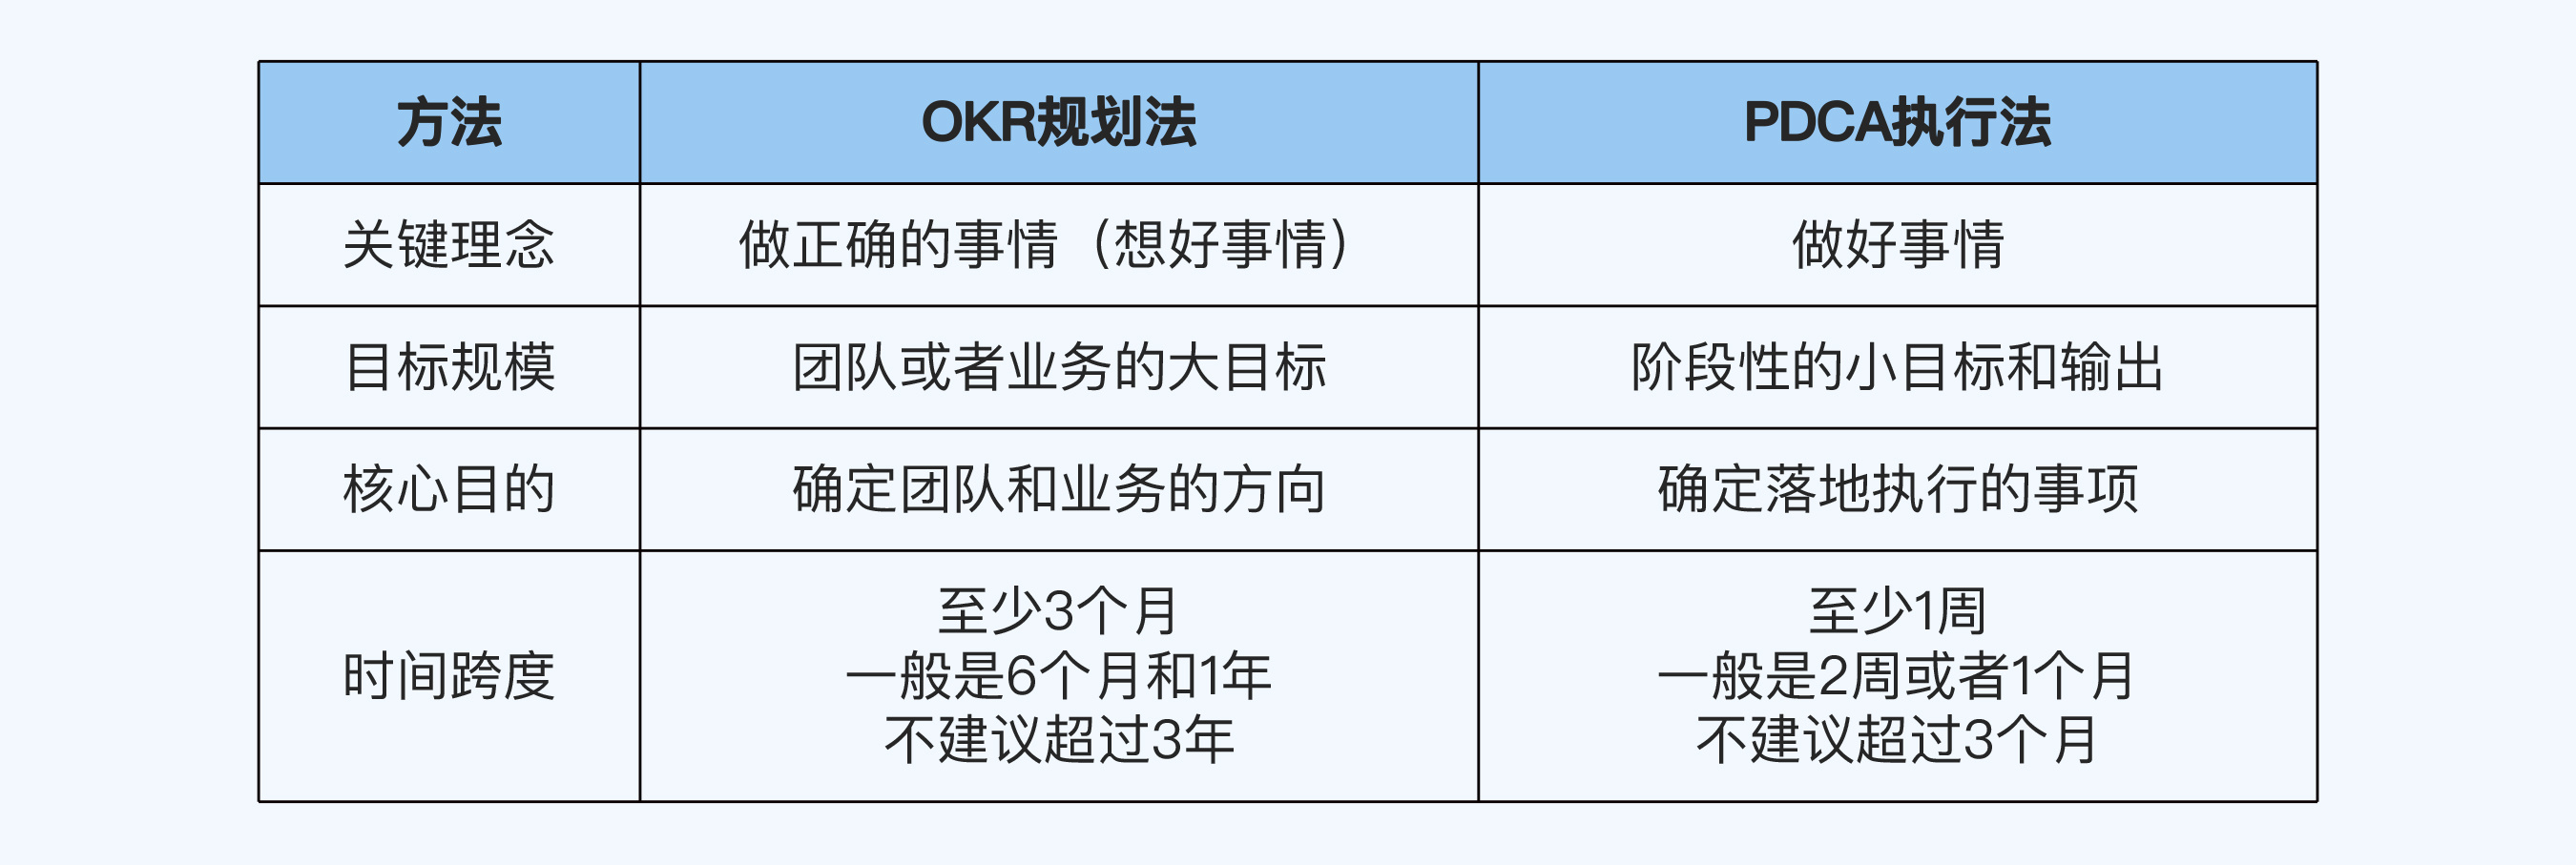 https://img.zhaoweiguo.com/knowledge/images/managements/PDCA1.jpeg